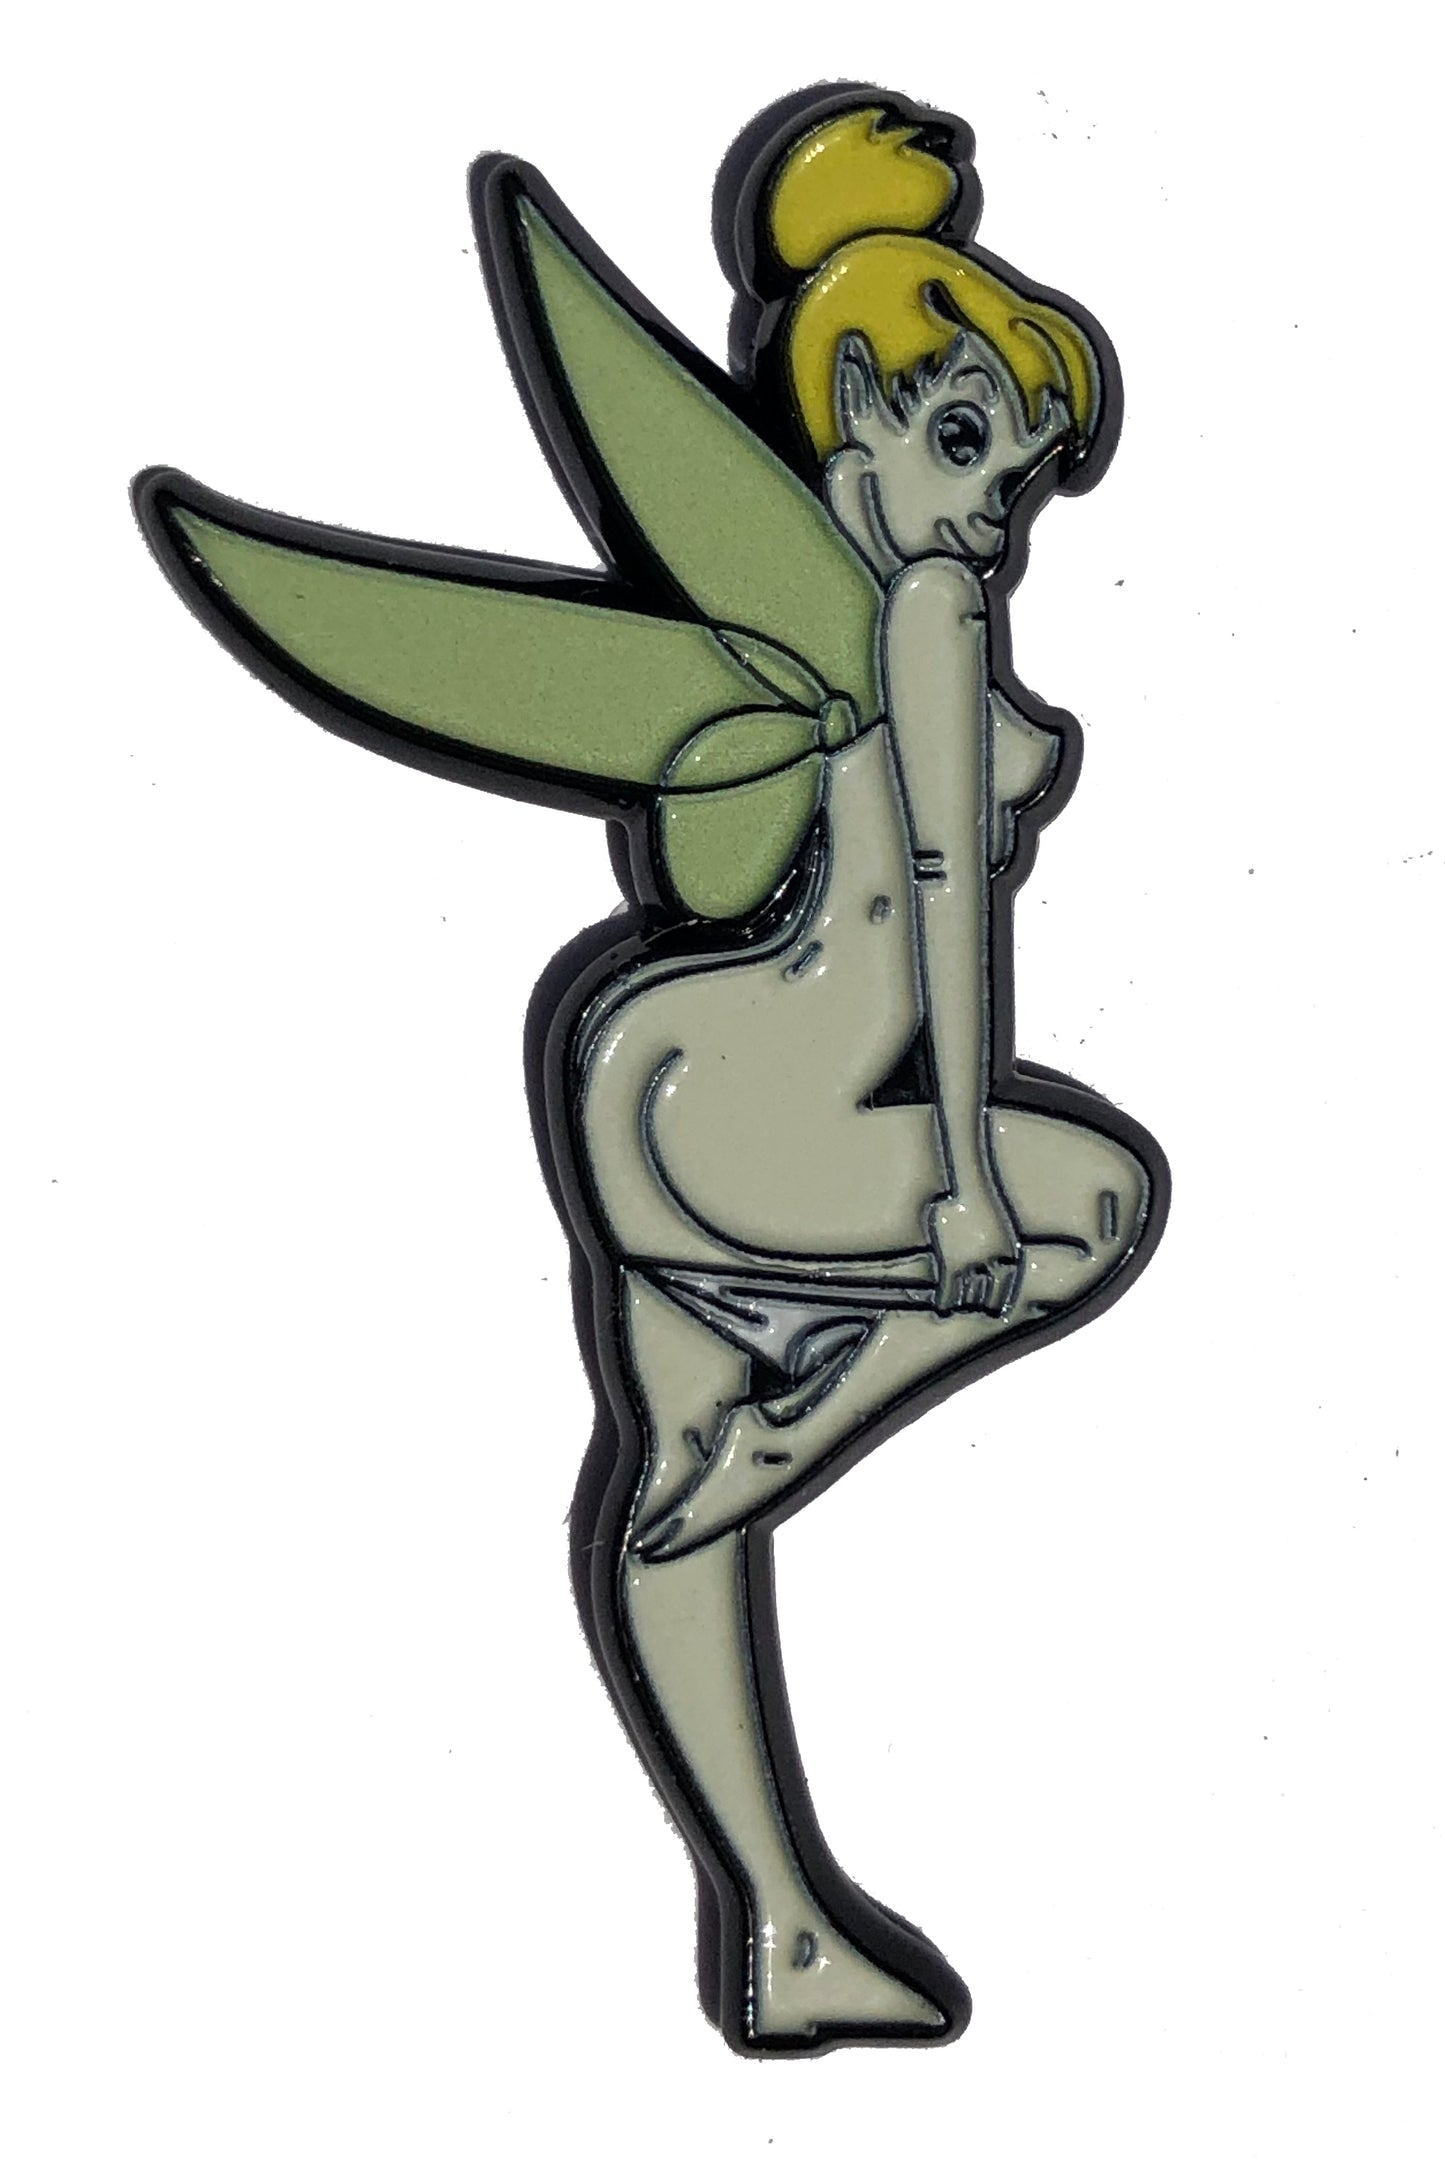 Sexy Pixie Taking of Undies Side Pin